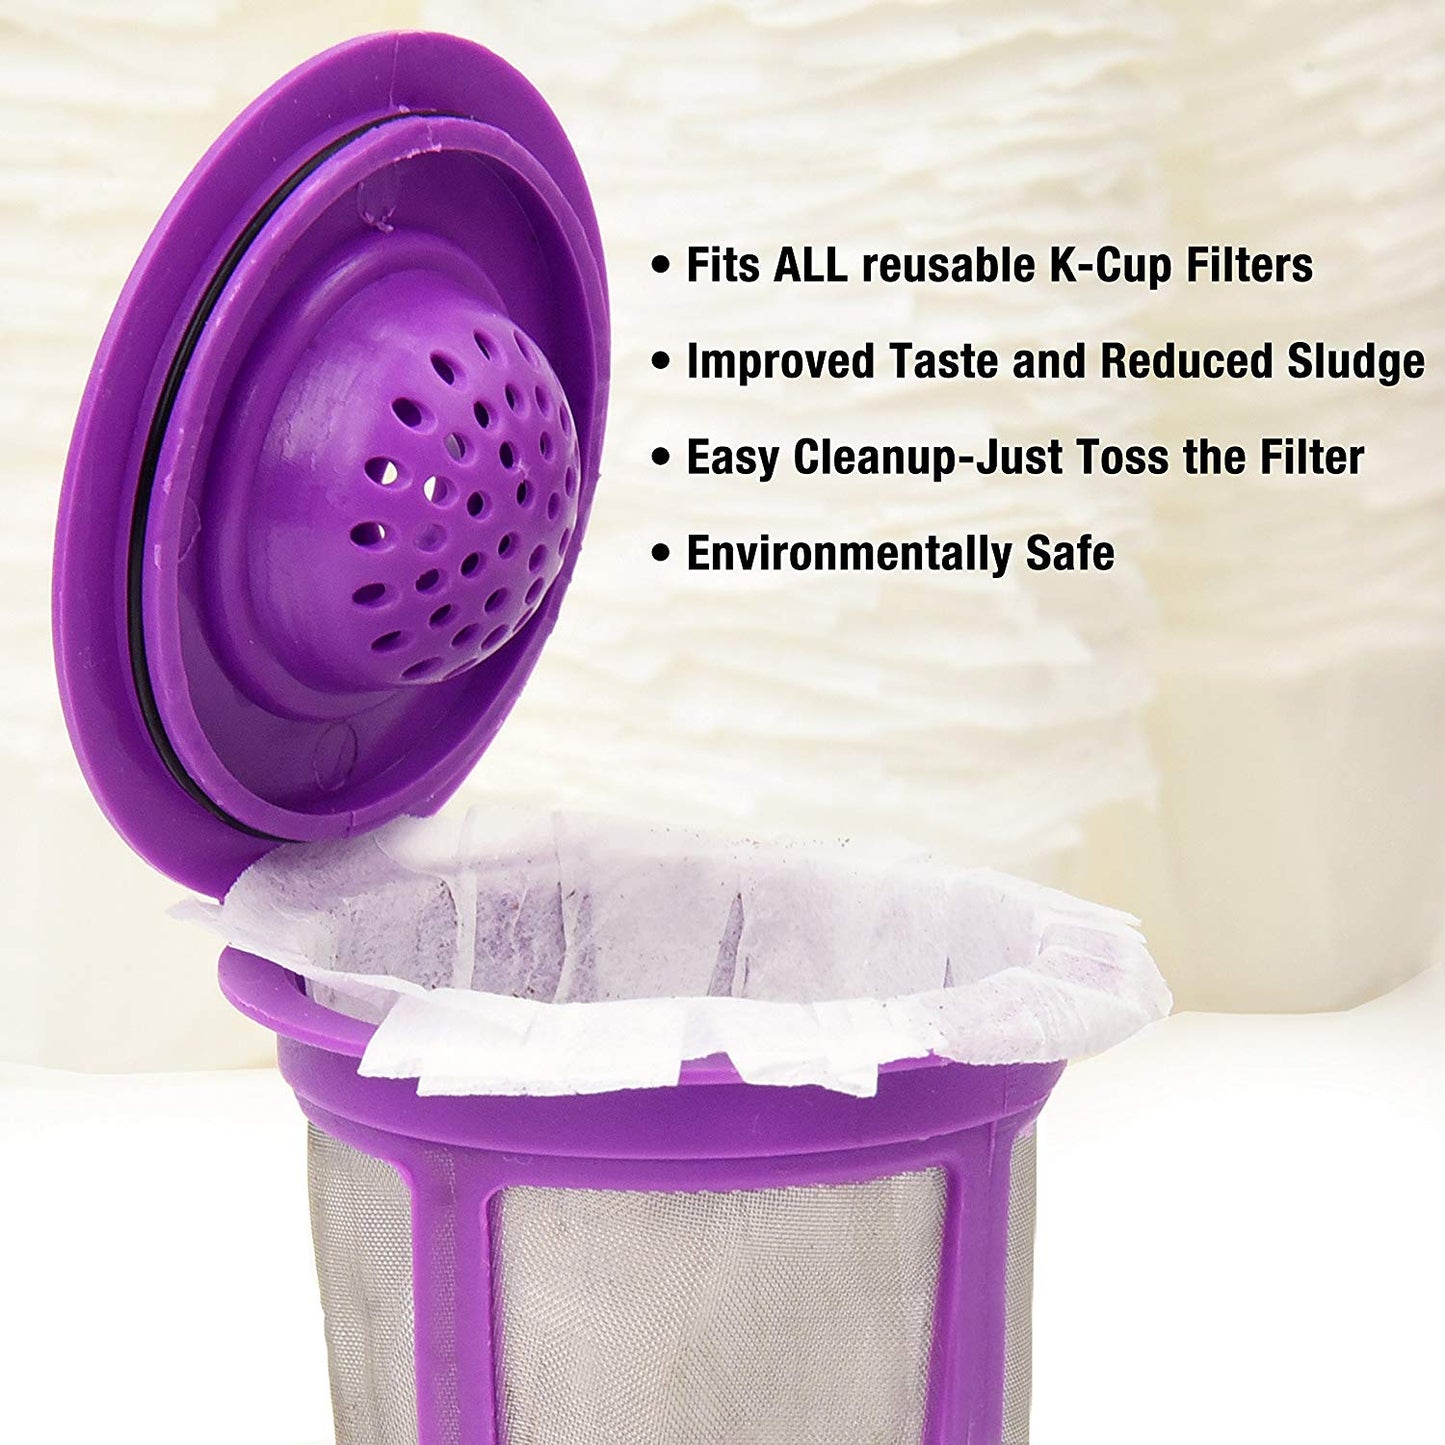 Optional Disposable Paper Filters for Reusable K Cups (300/Box) Fits All Brands